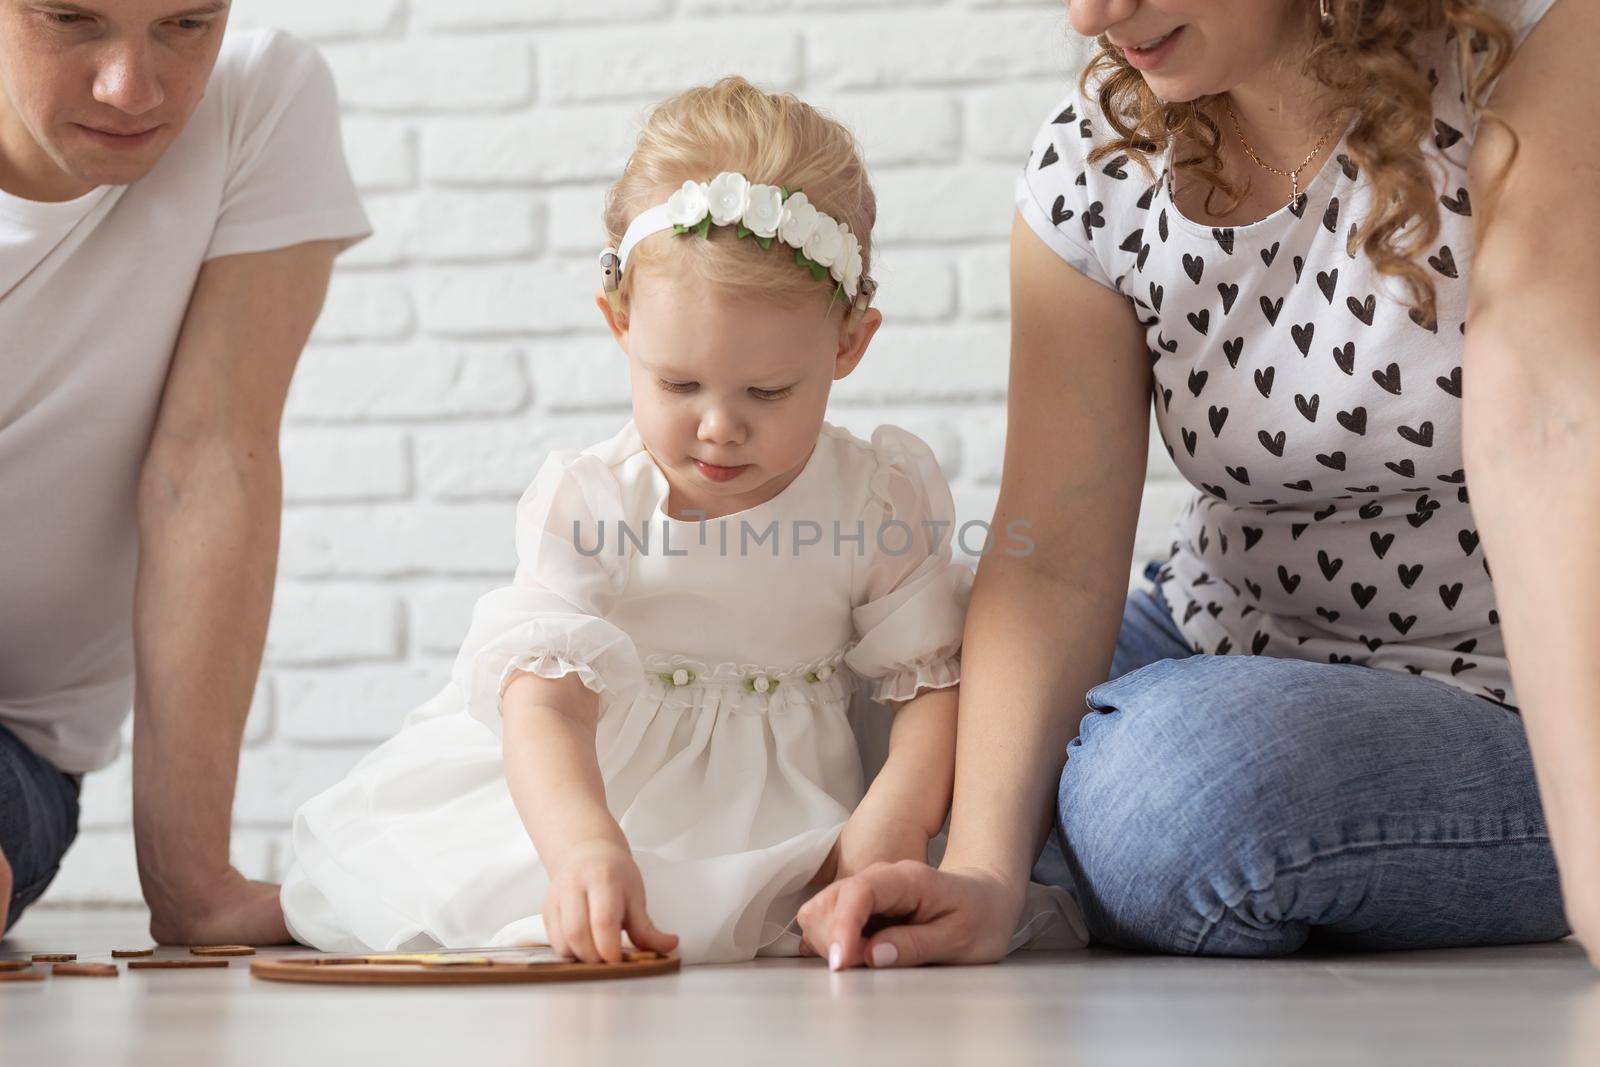 Baby child with hearing aids and cochlear implants plays with parents on floor. Deaf and rehabilitation and diversity concept by Satura86